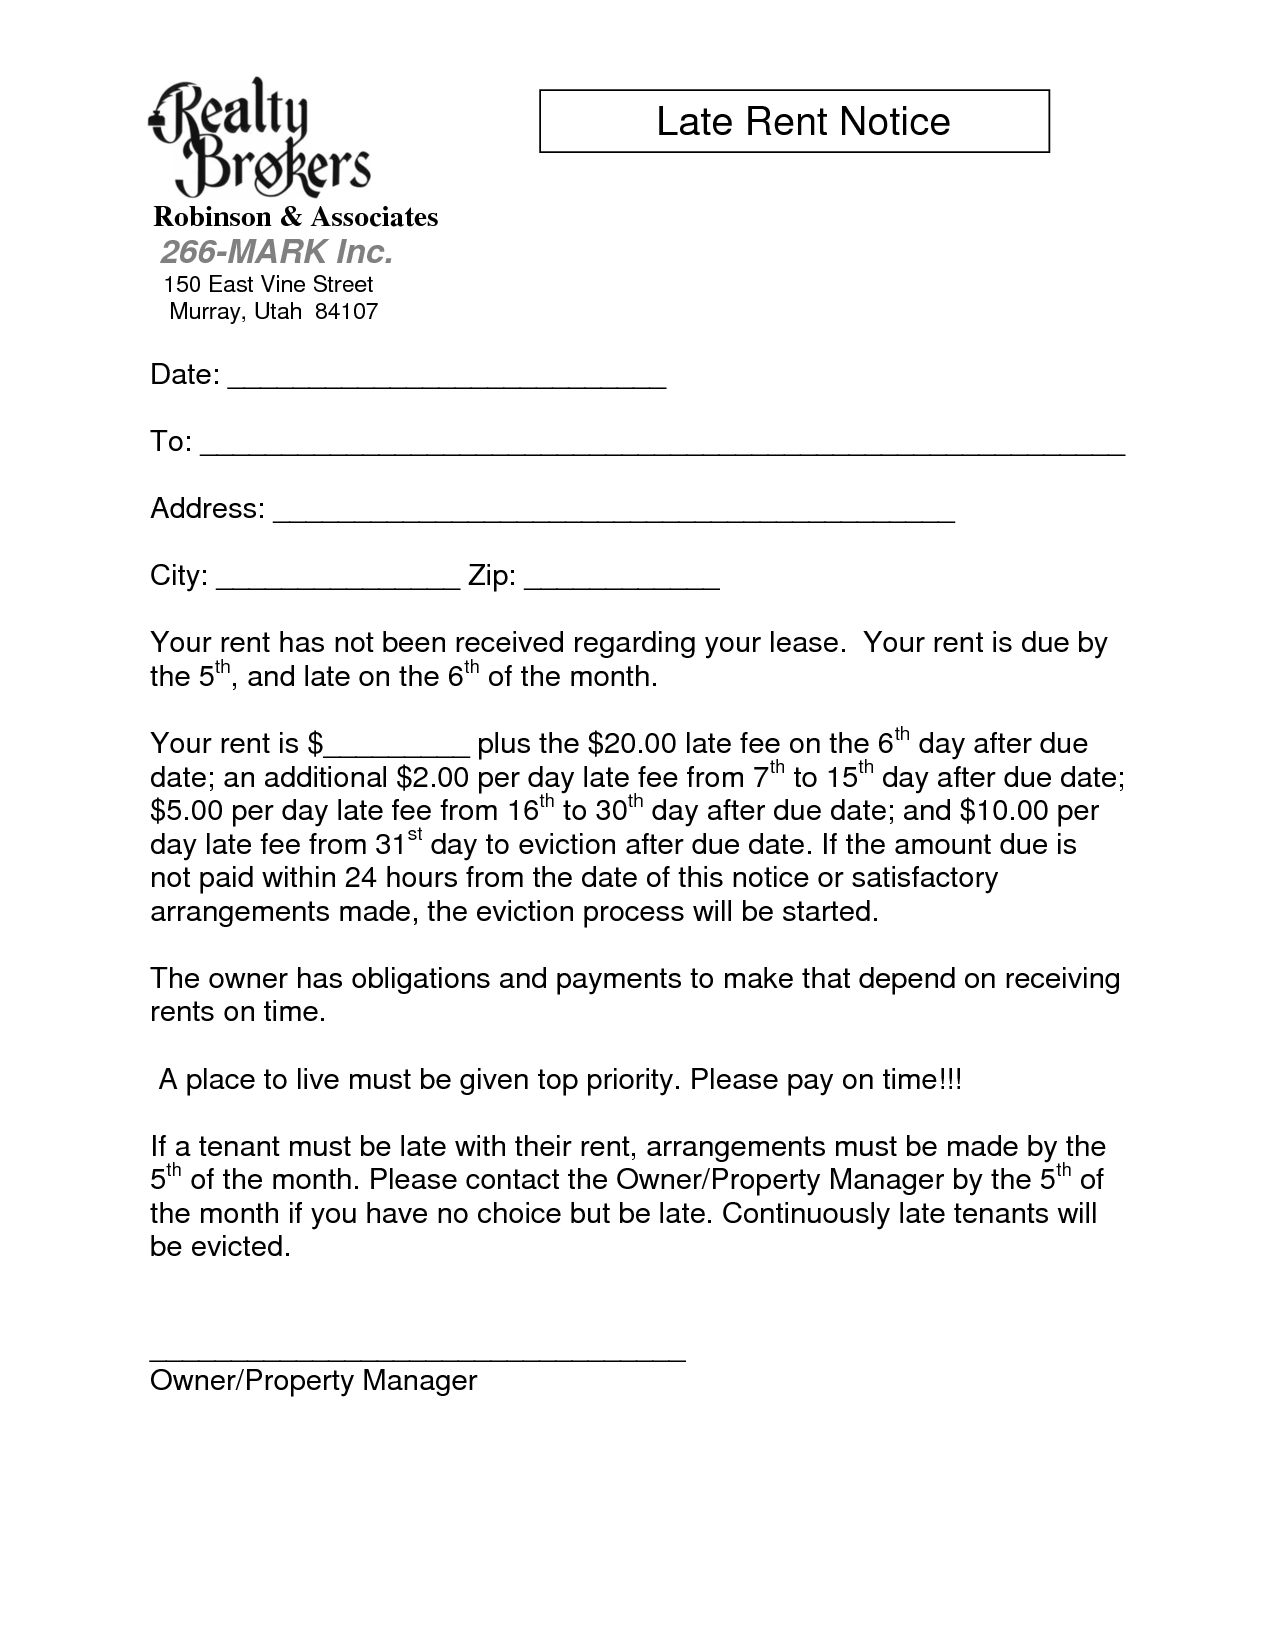 Sample Late Rent Notice Free Printable Documents